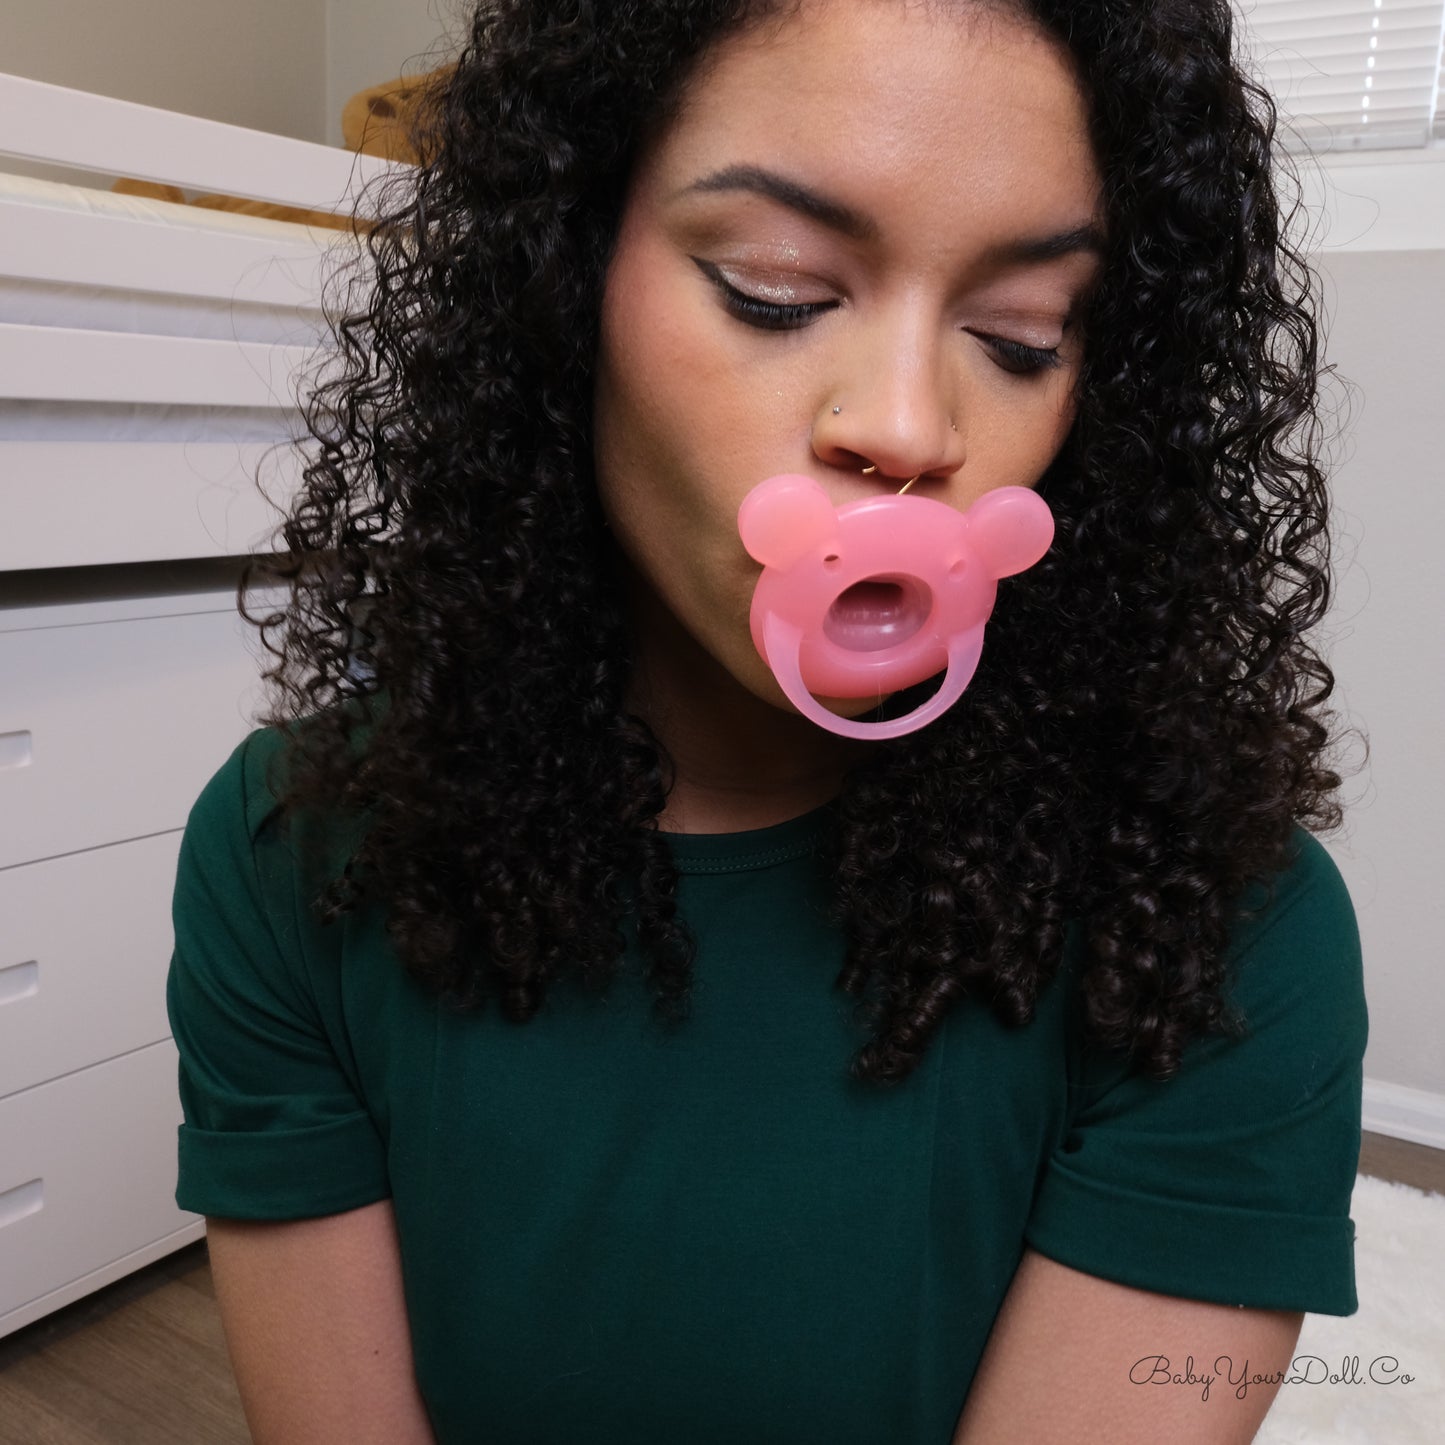 Pink Teddy Soother | Adult Pacifier